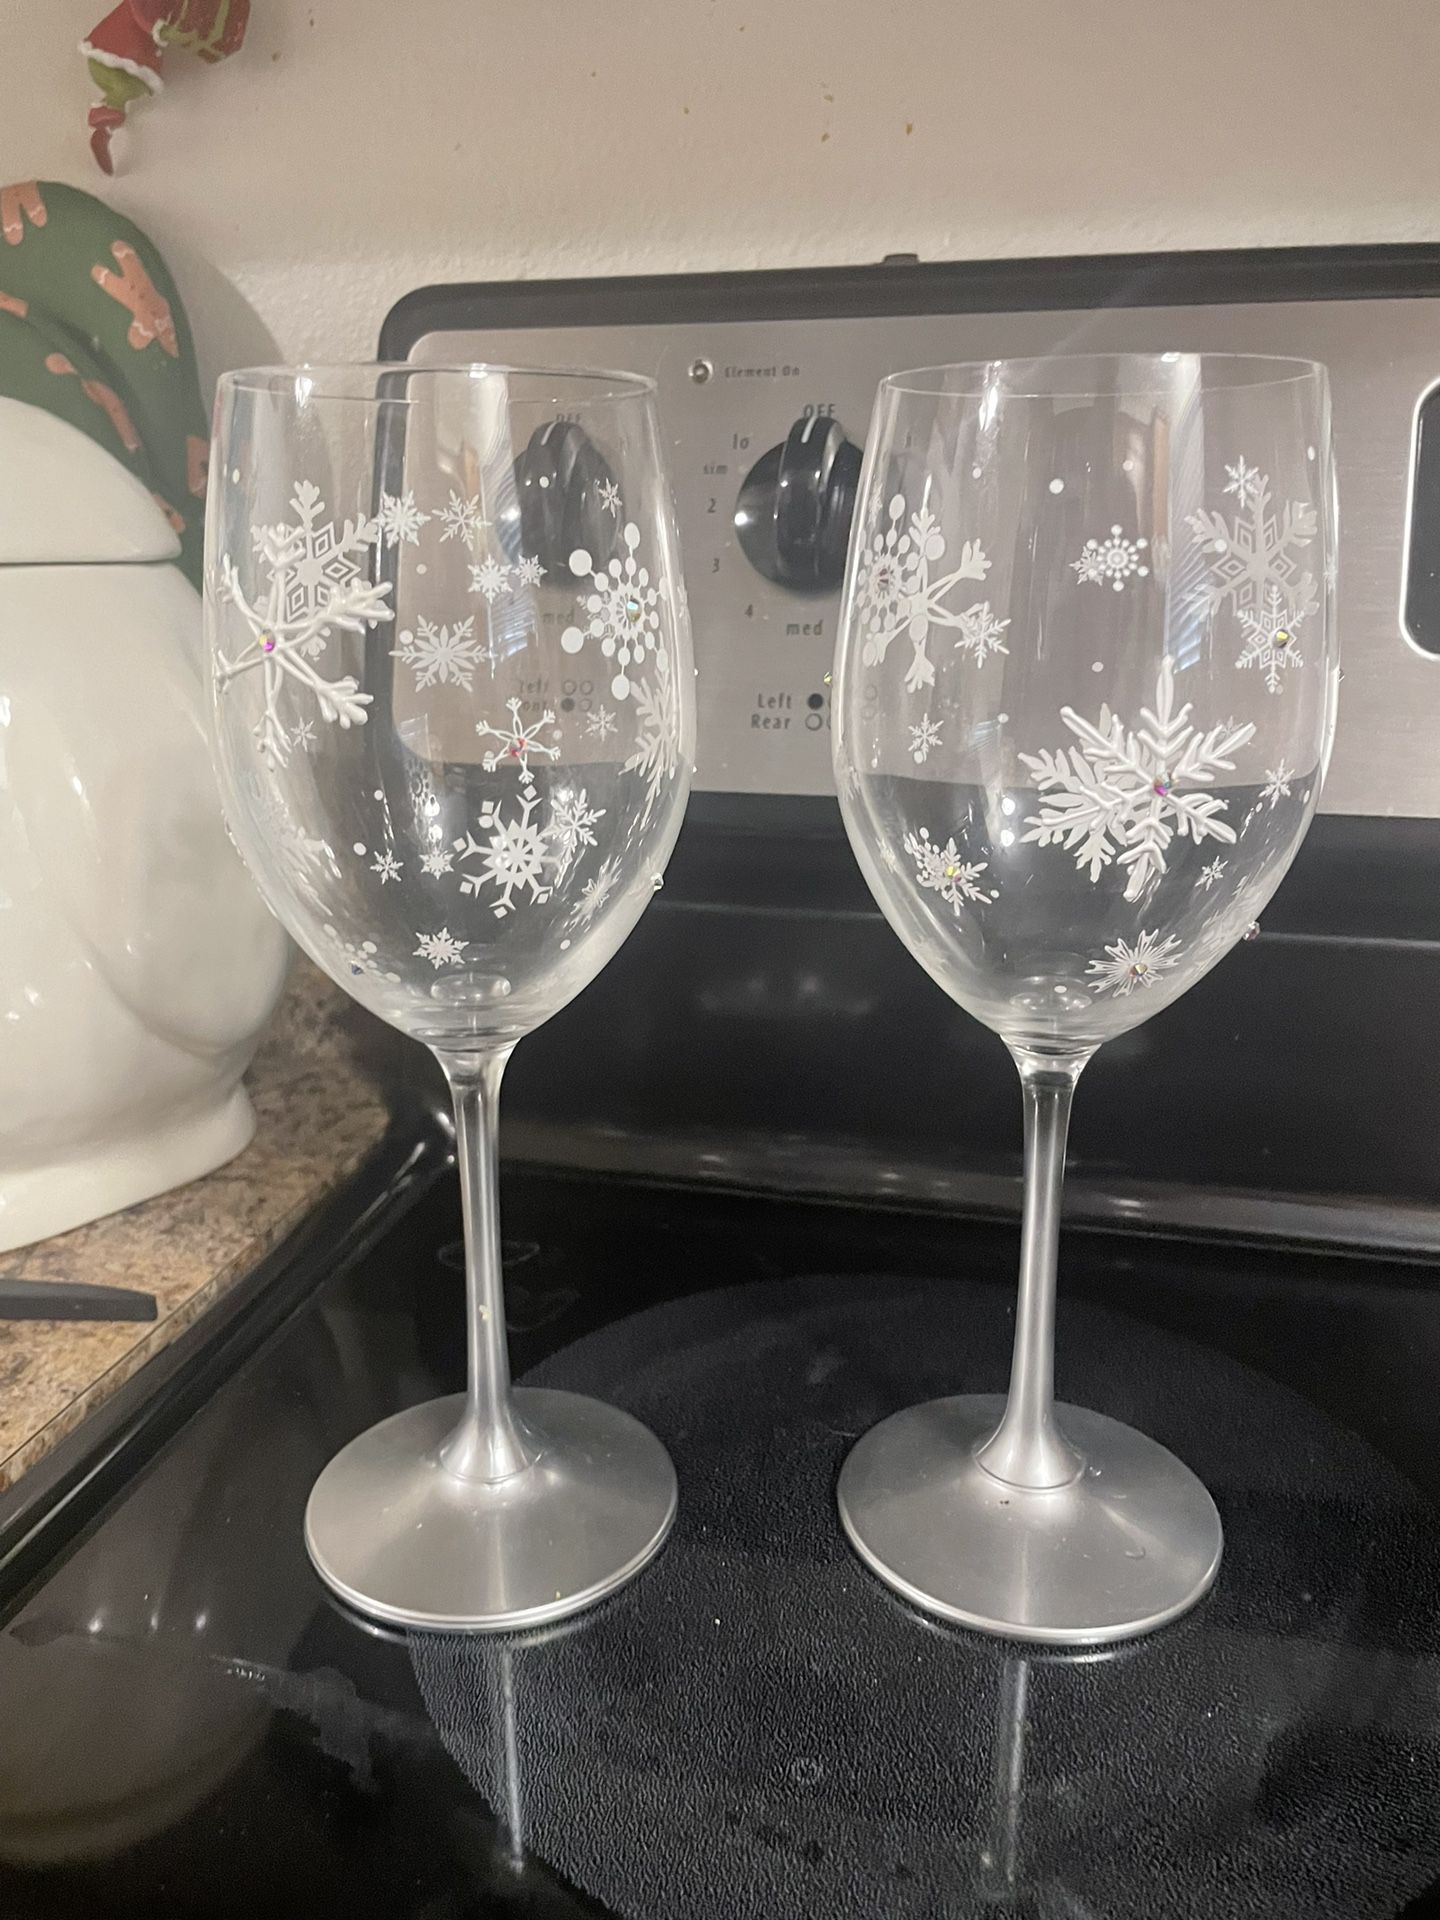 NORLAN Whisky Glasses (Set Of 2) for Sale in San Diego, CA - OfferUp